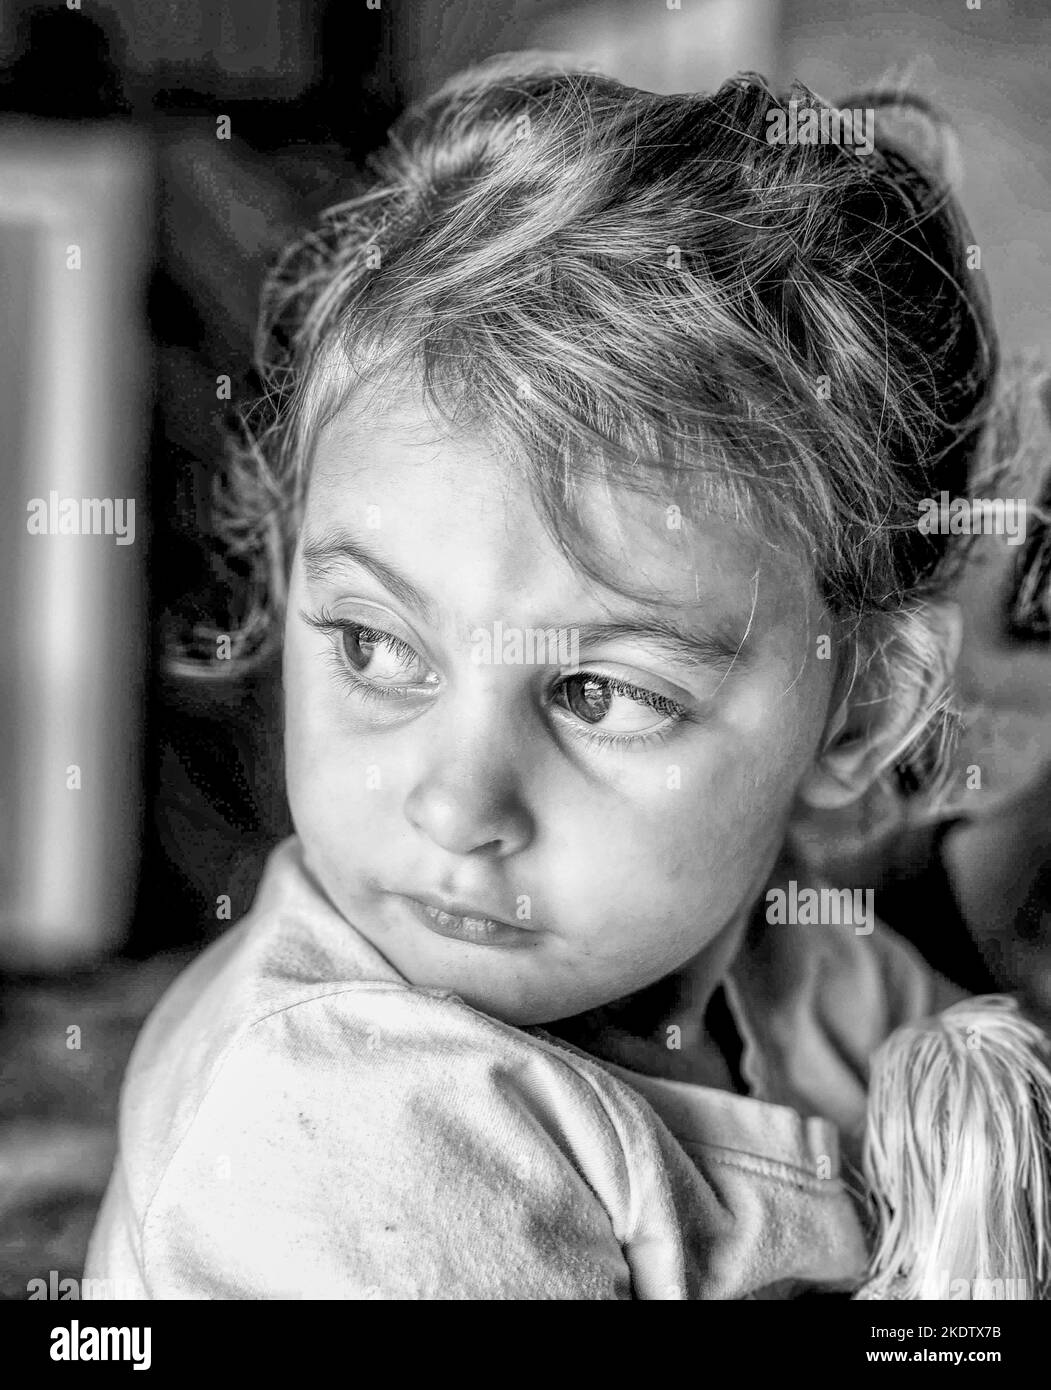 Portrait of a little girl staring at something (Black & White) Stock Photo